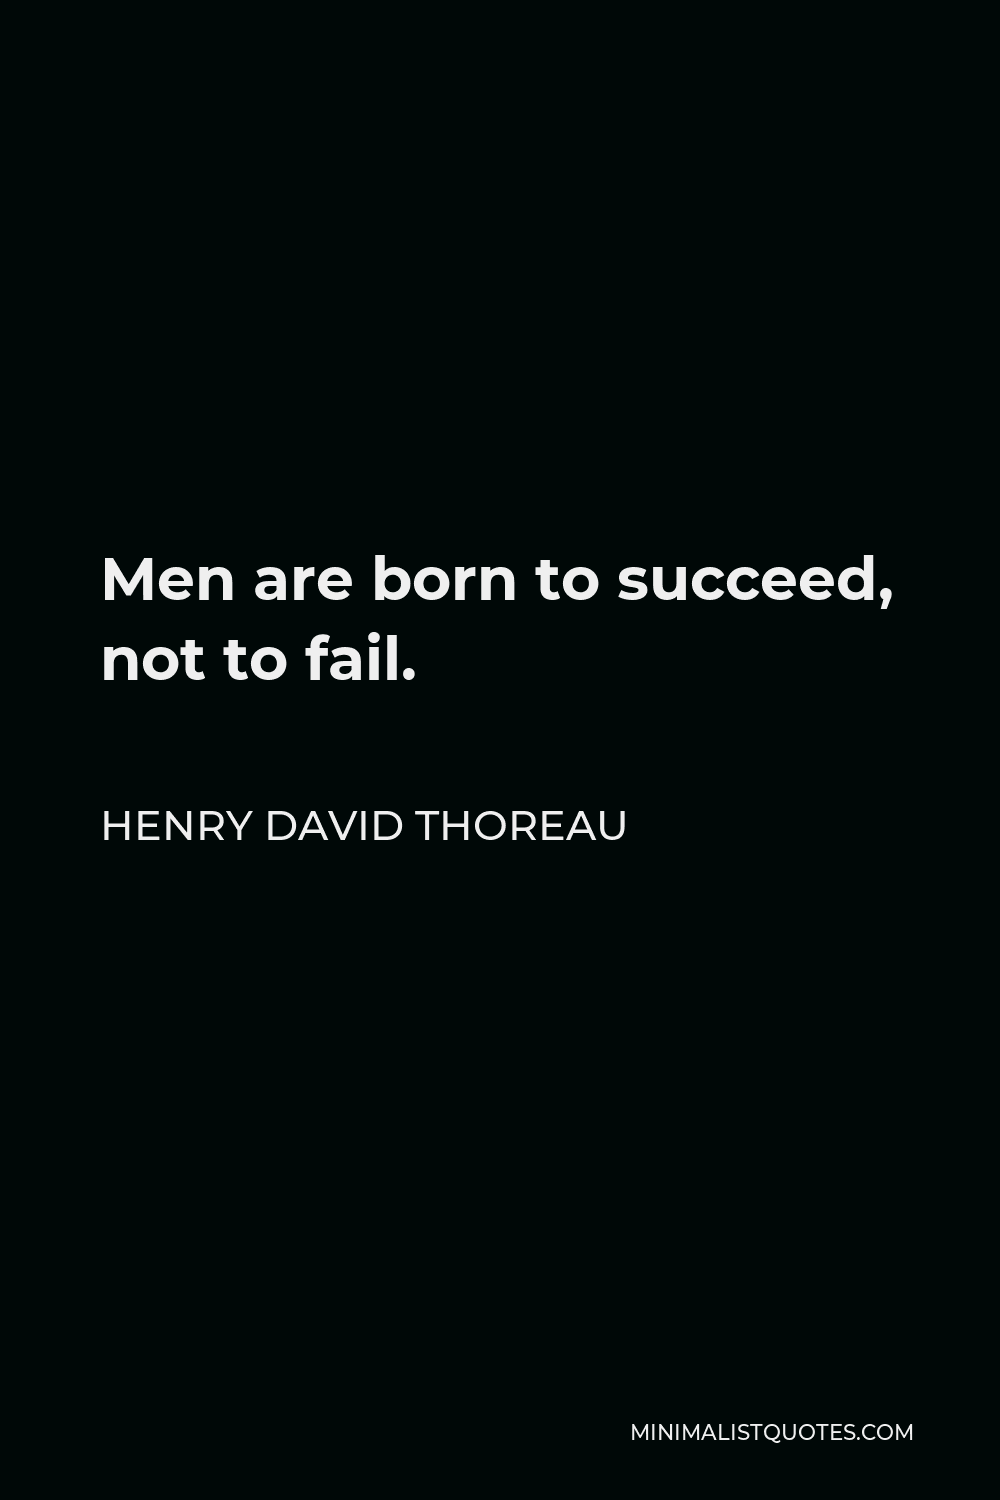 Henry David Thoreau Quote - Men are born to succeed, not to fail.